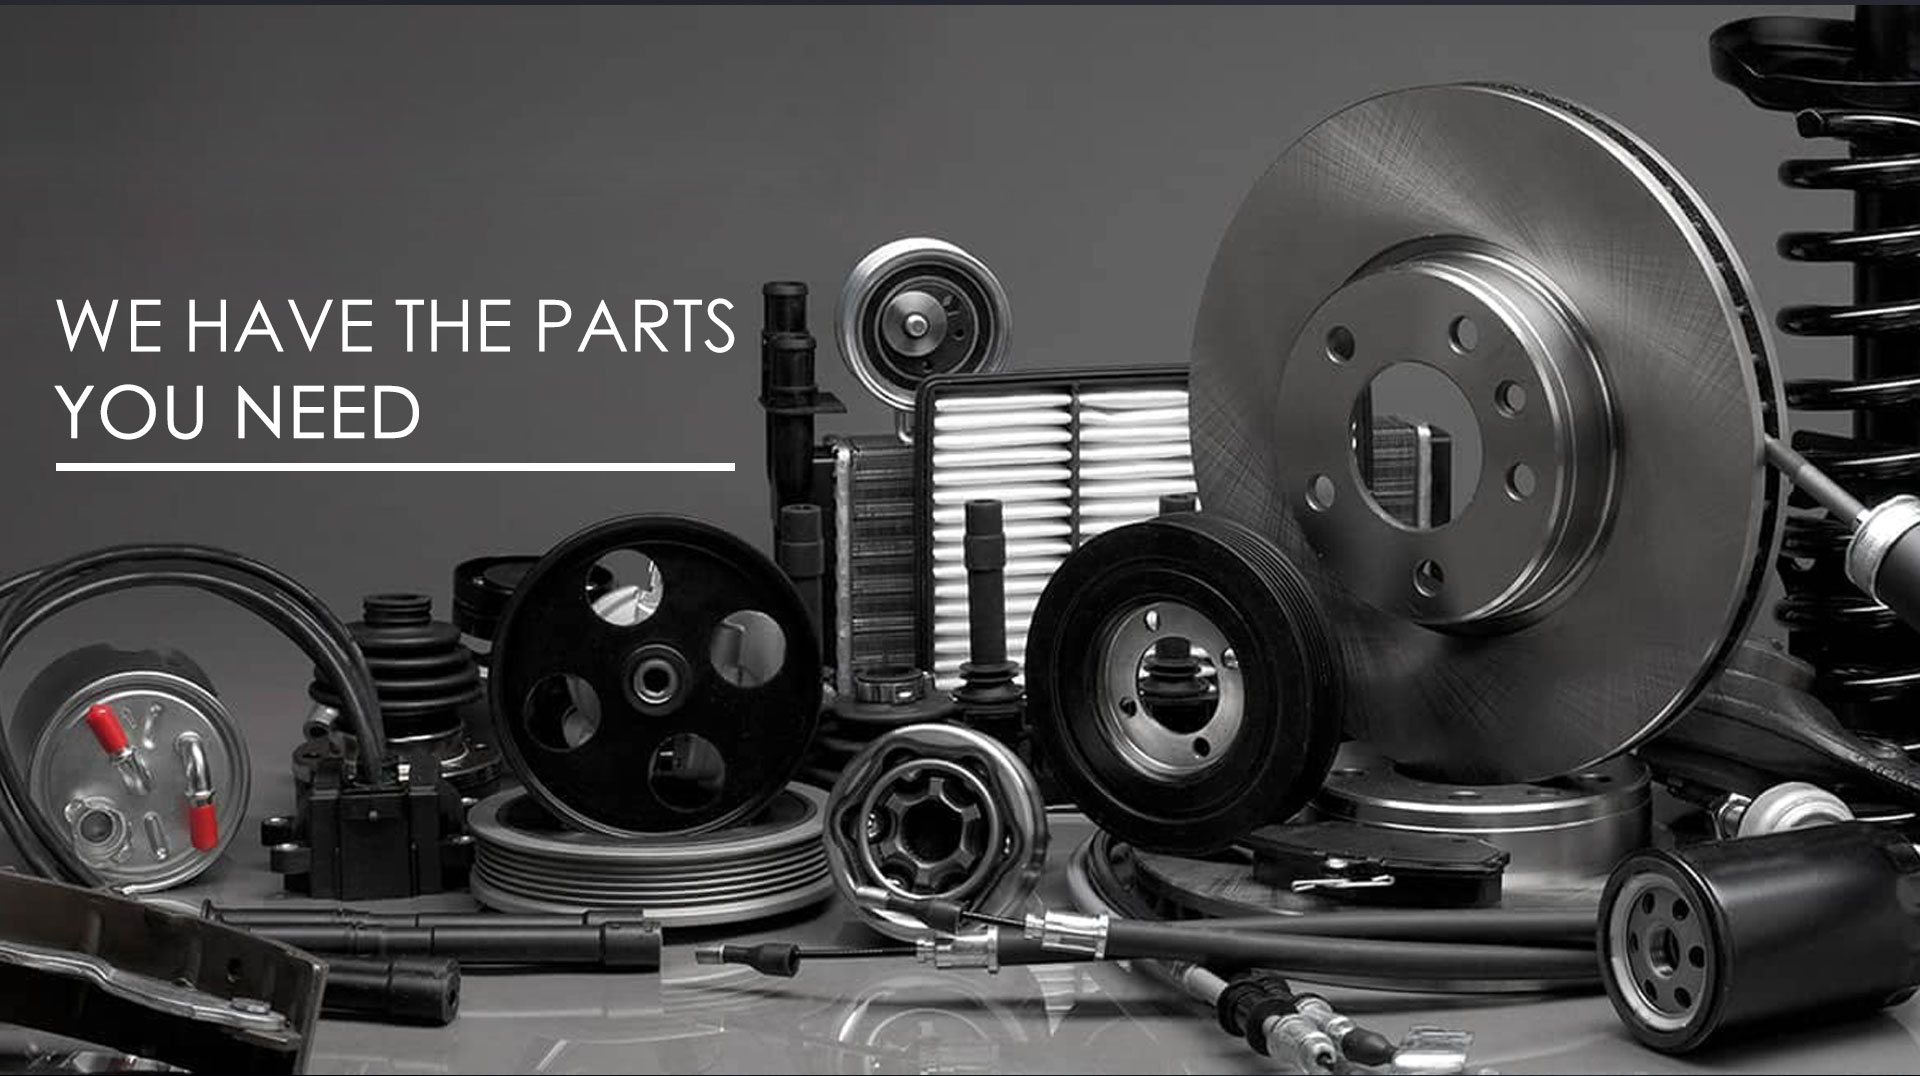 We have the parts you need